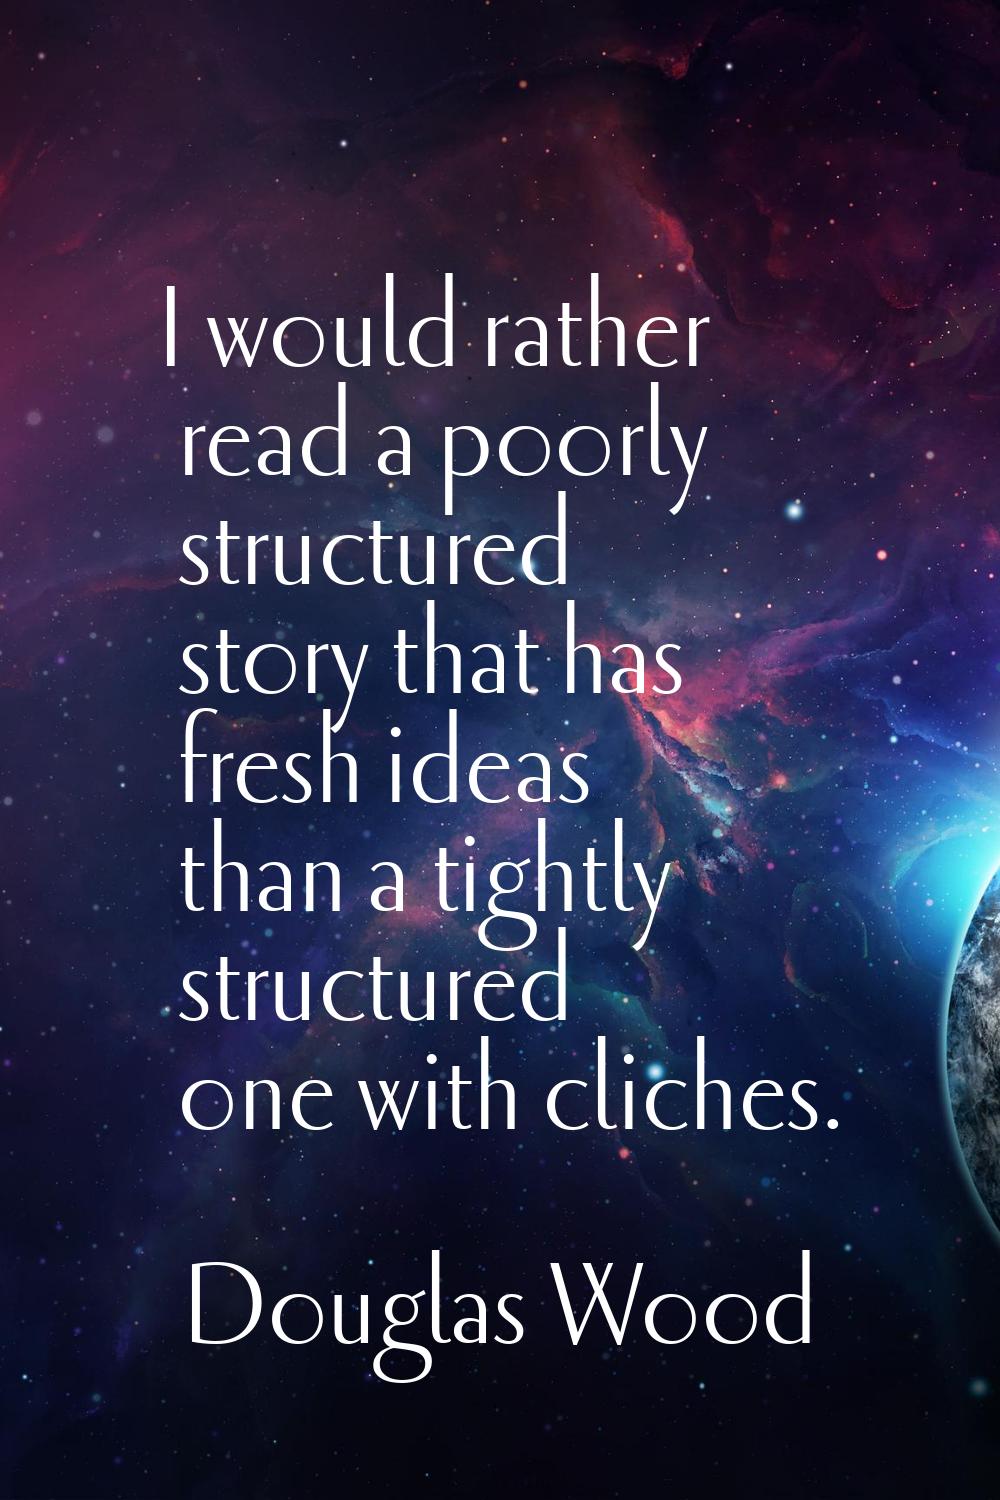 I would rather read a poorly structured story that has fresh ideas than a tightly structured one wi